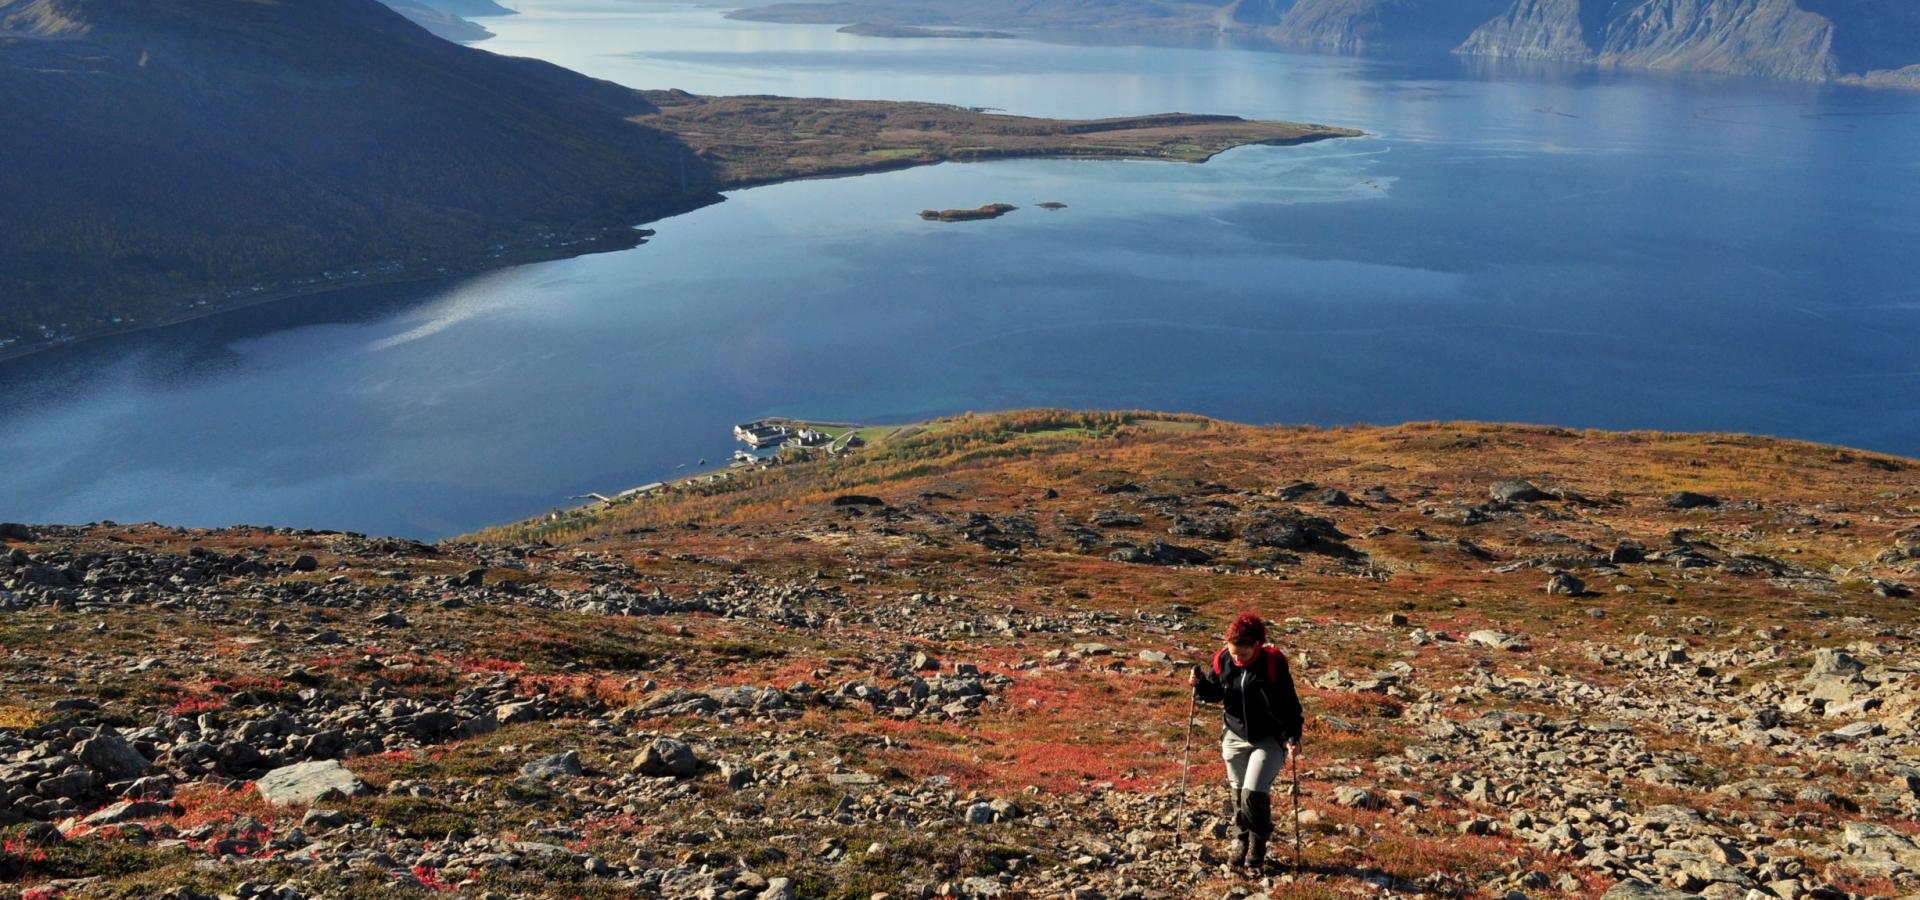 Hiker on the way up Uløytinden in autumn colors, the Lyngenfjord and mountains in the background